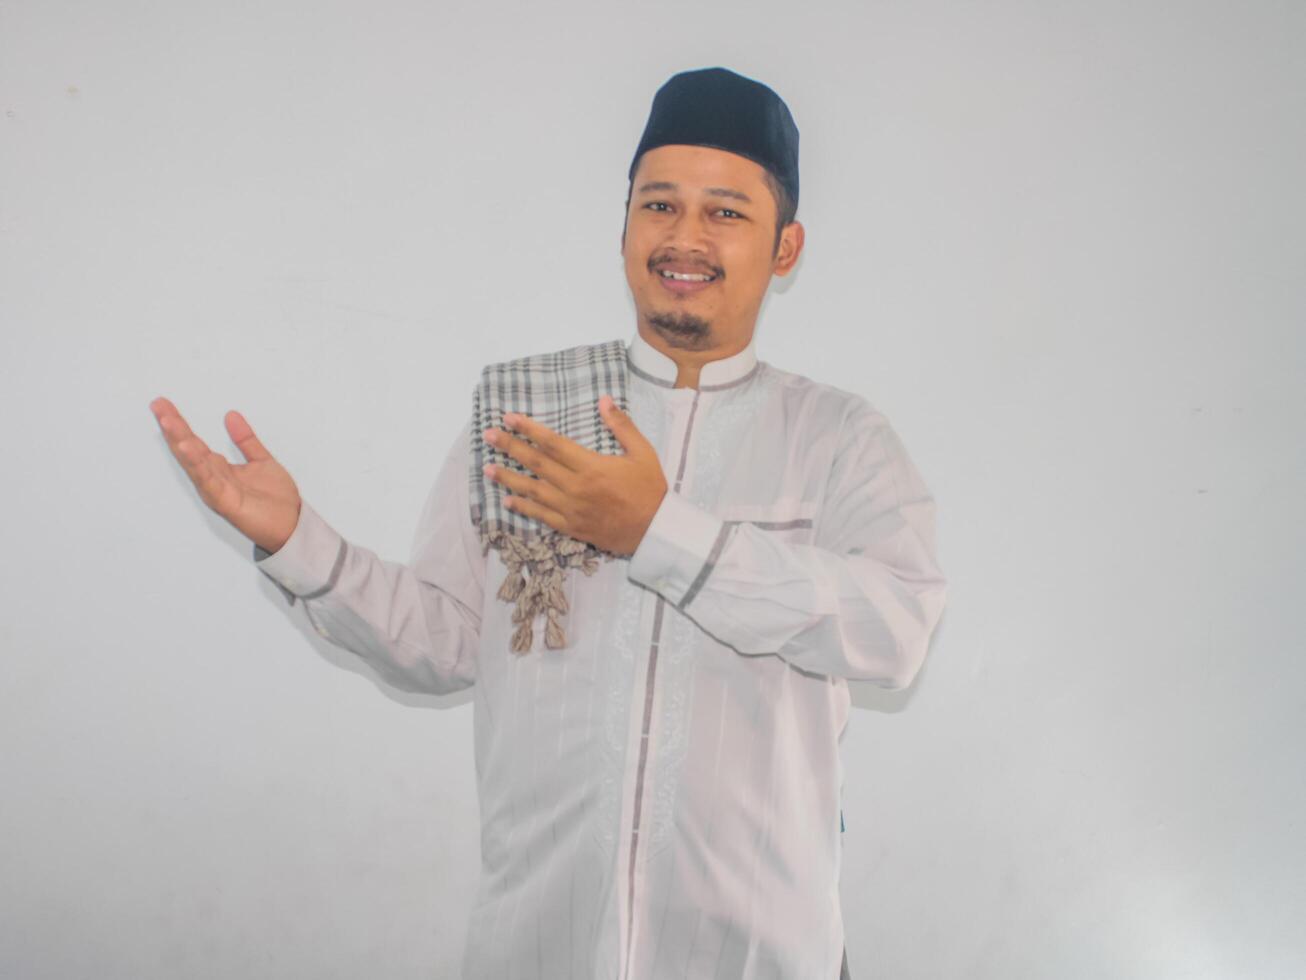 Moslem Asian man smiling and pointing both hands to the side photo